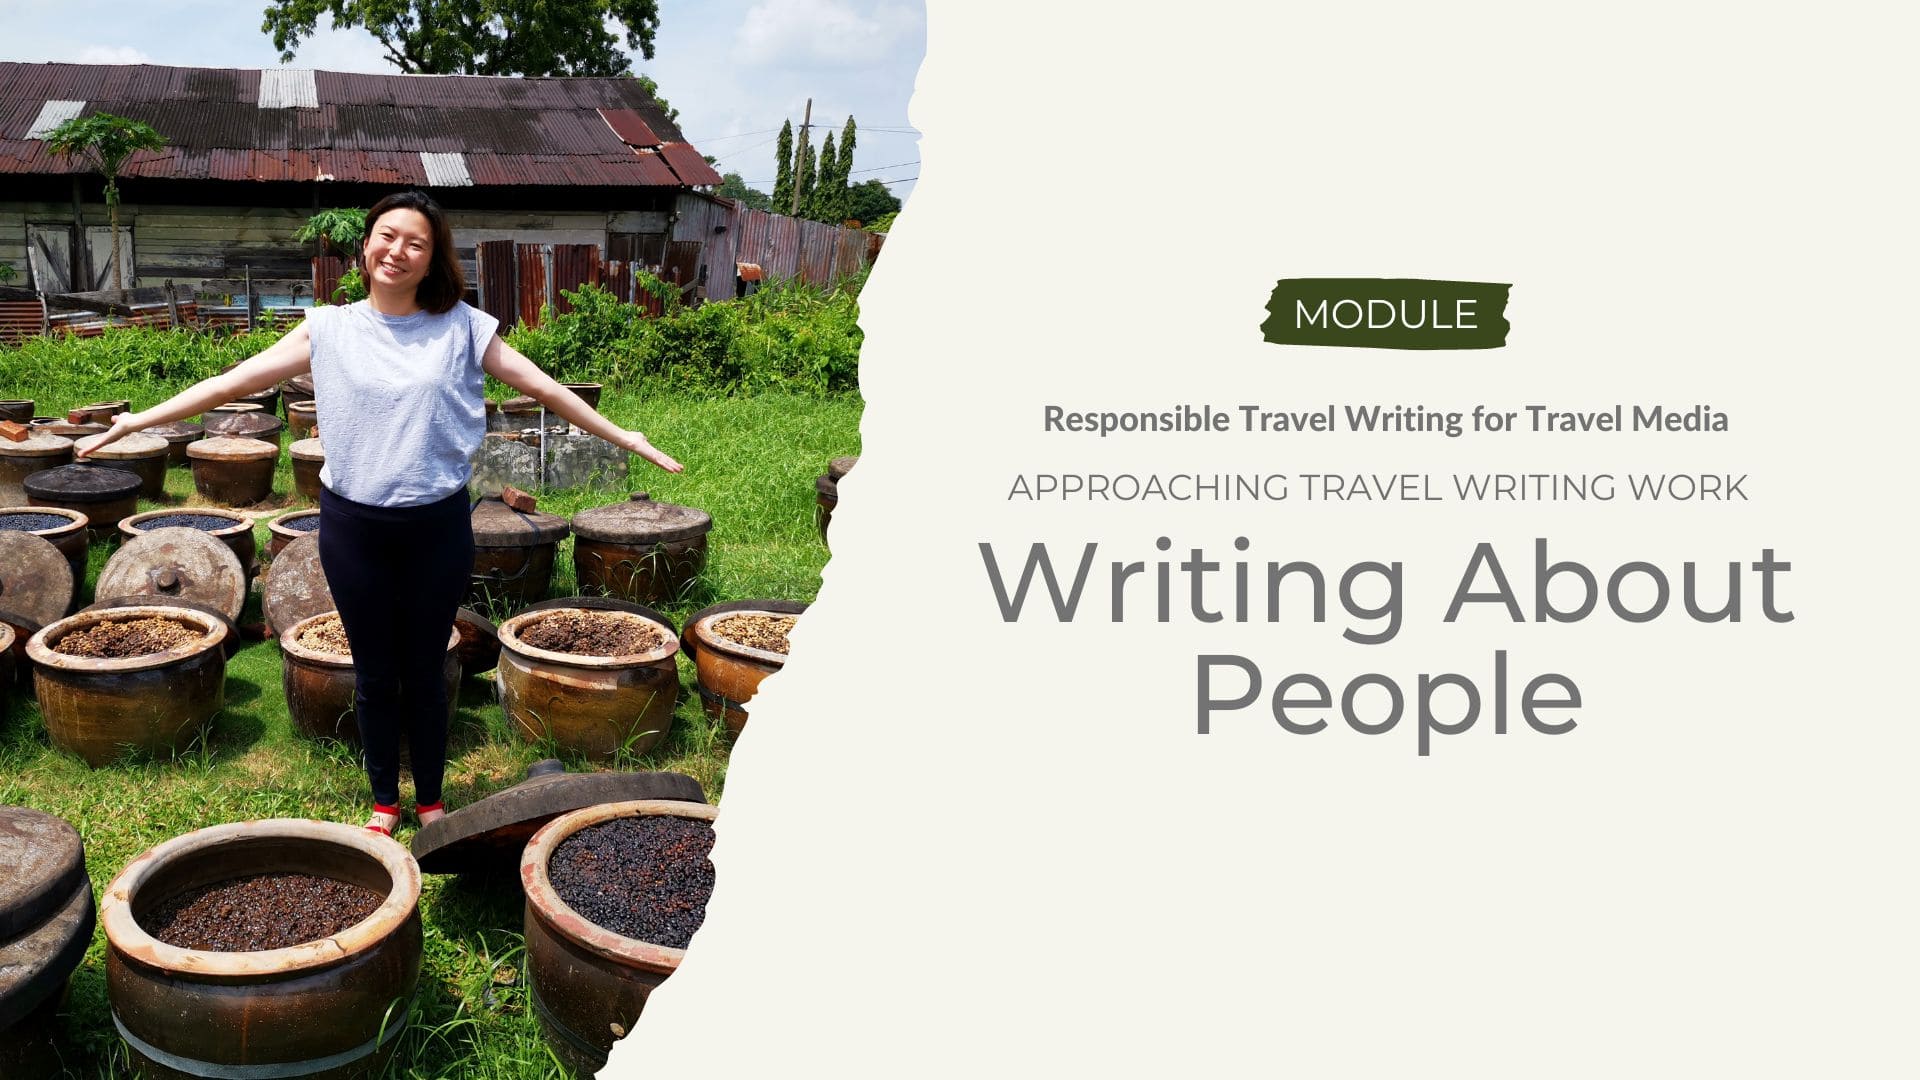 Approaching Travel Writing Work - Writing About People